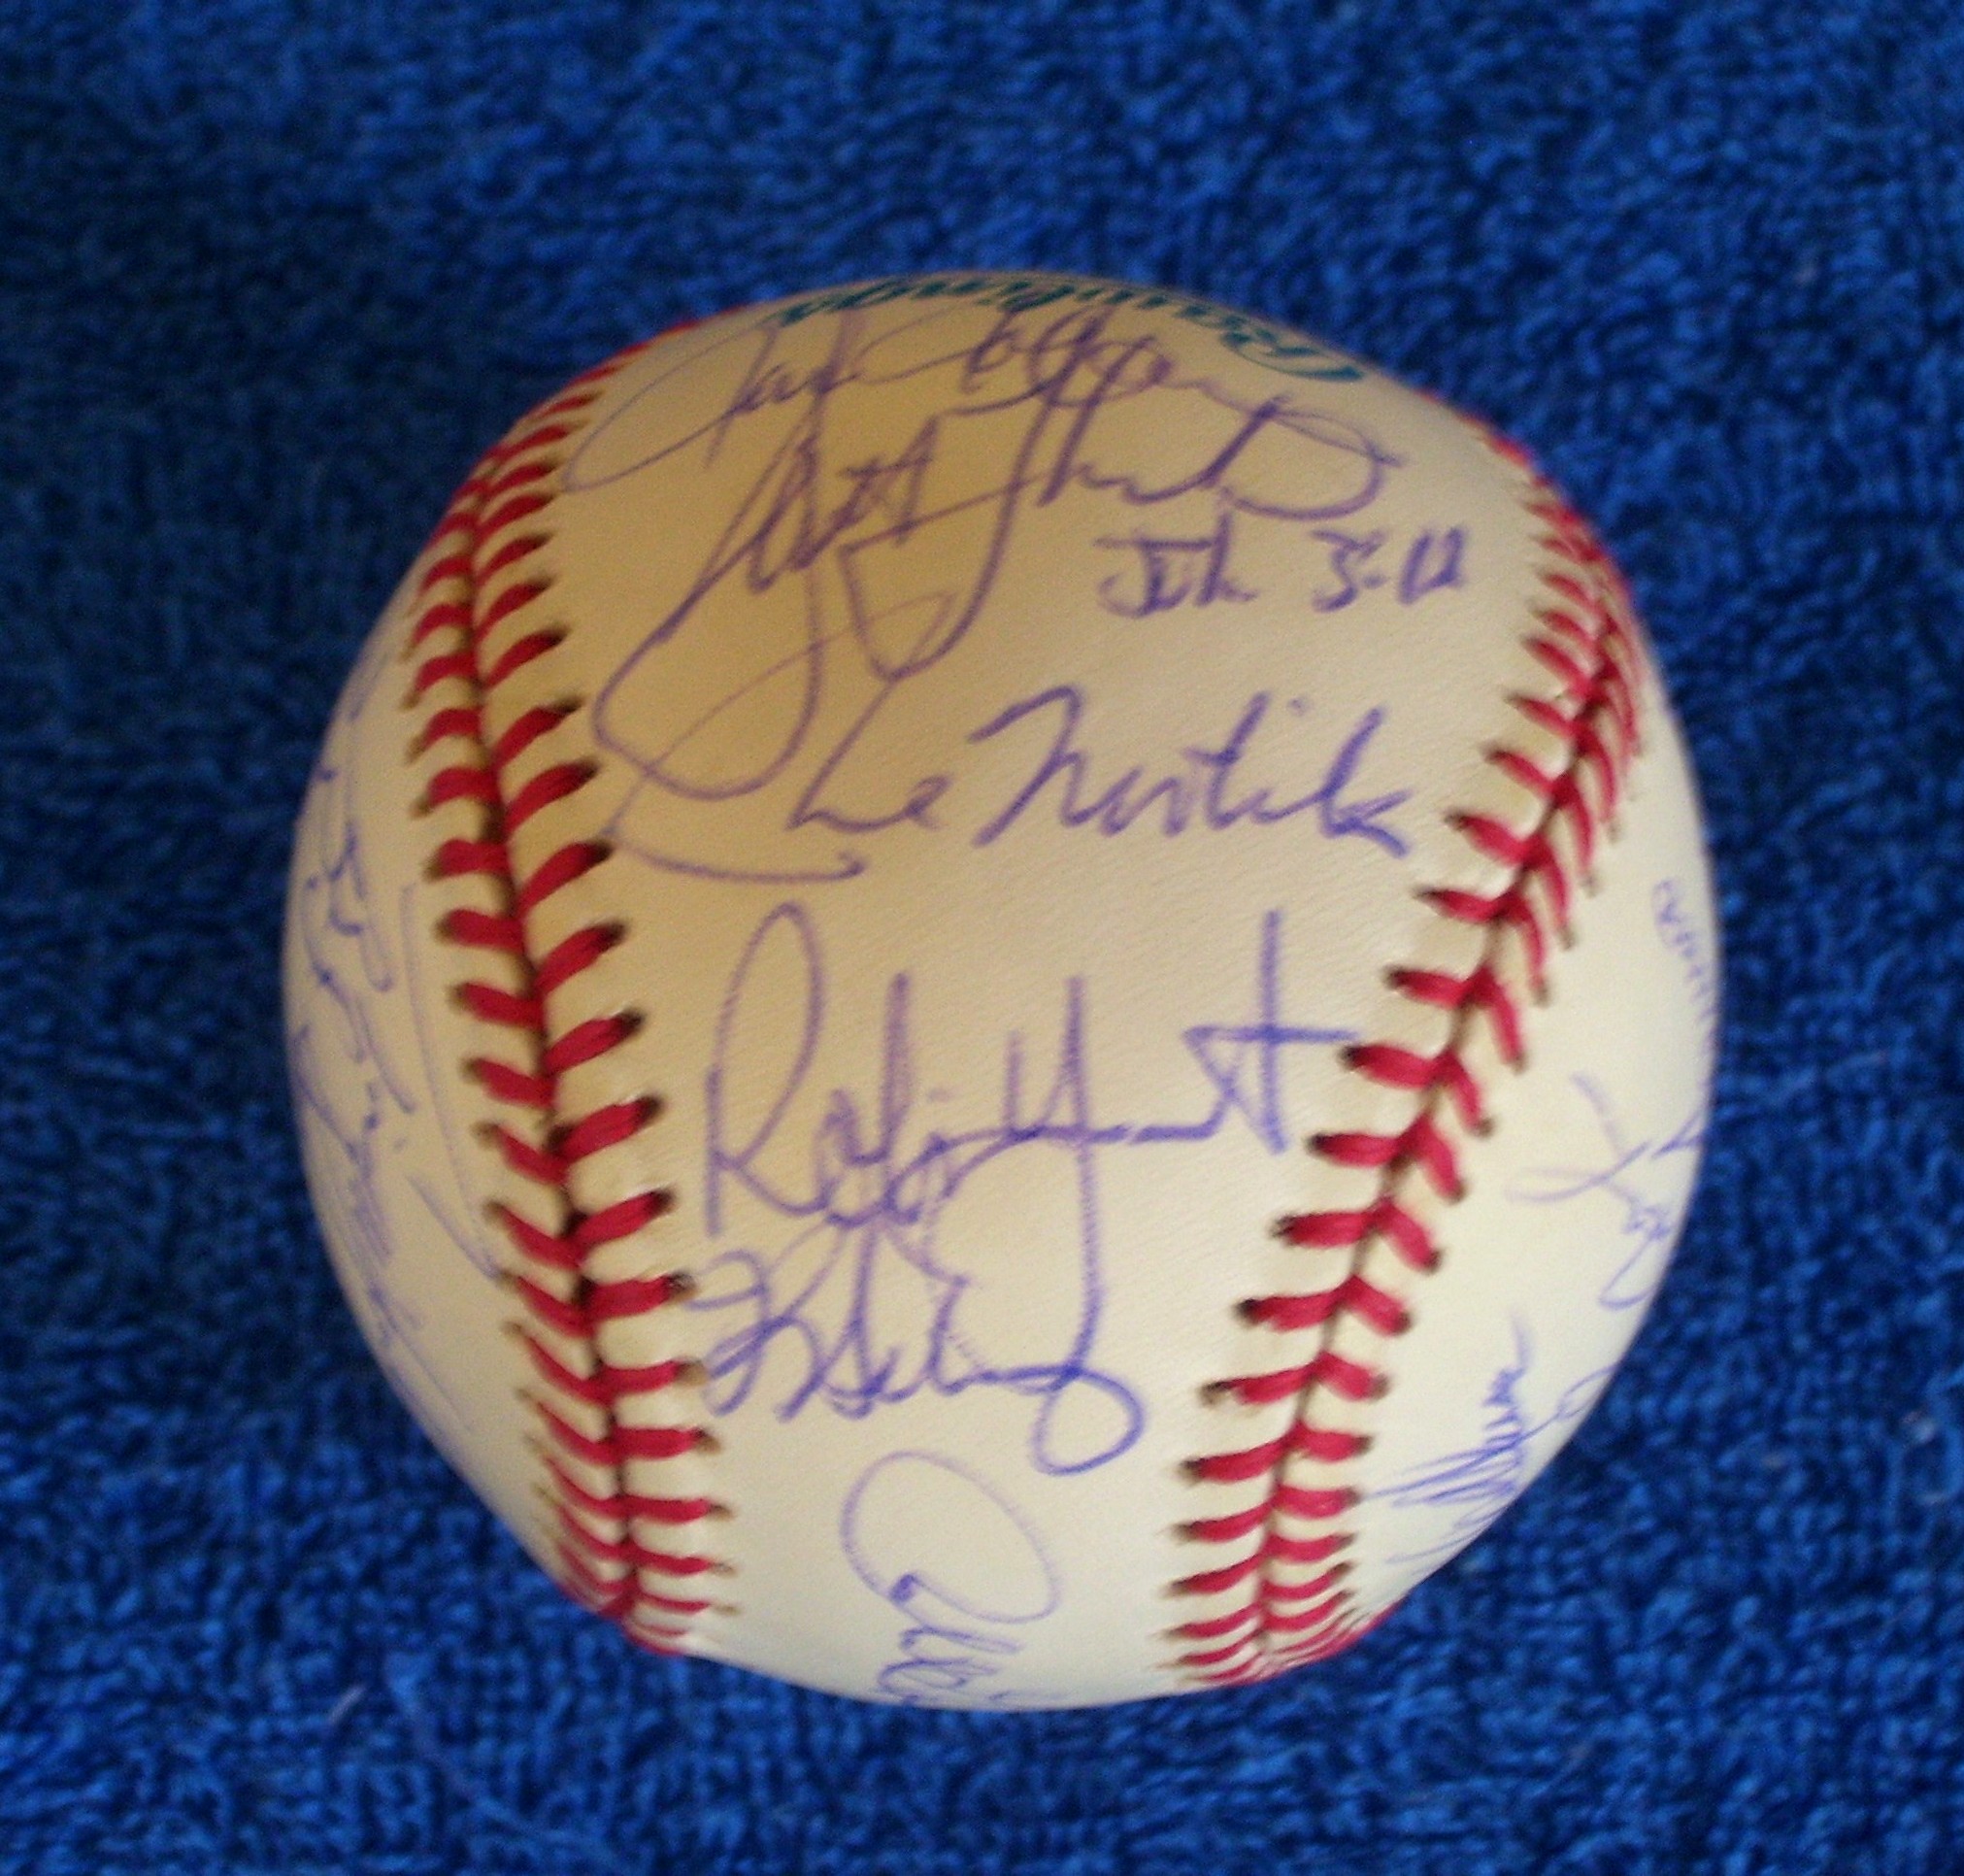   1992 Brewers - Team Signed/AUTOGRAPHED baseball [#ed06] w/24 Signatures Baseball cards value